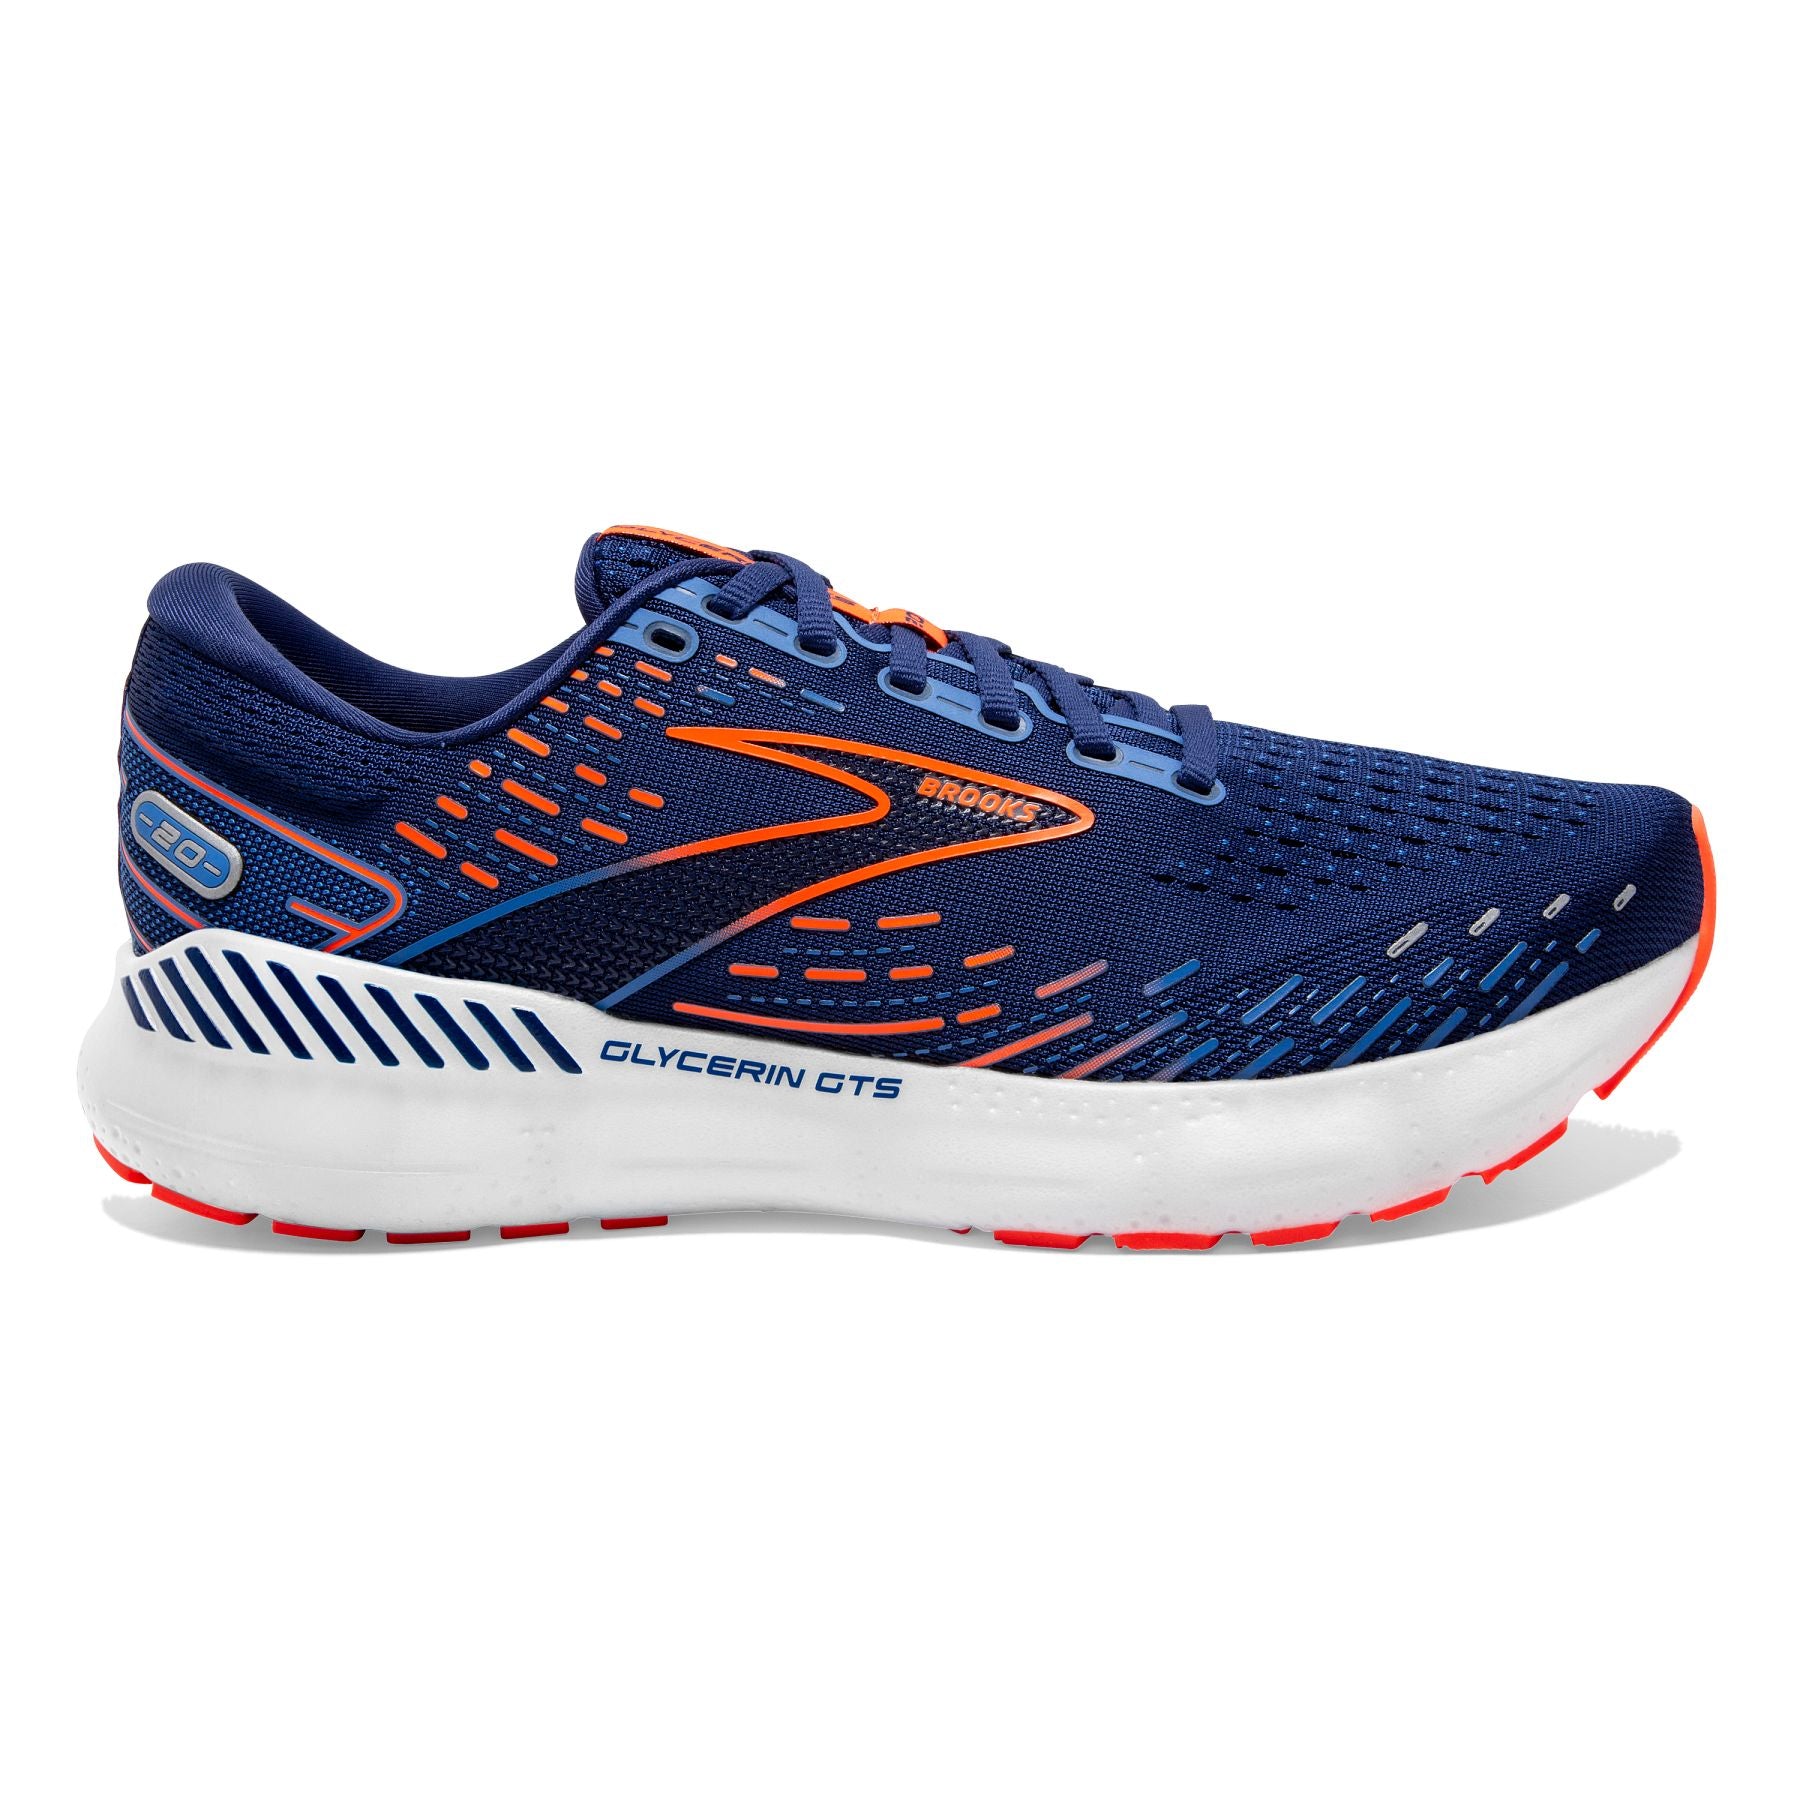 Lateral view of the Men's Glycerin GTS 20 by BROOKS in the color Blue Depths/Palace Blue/Orange